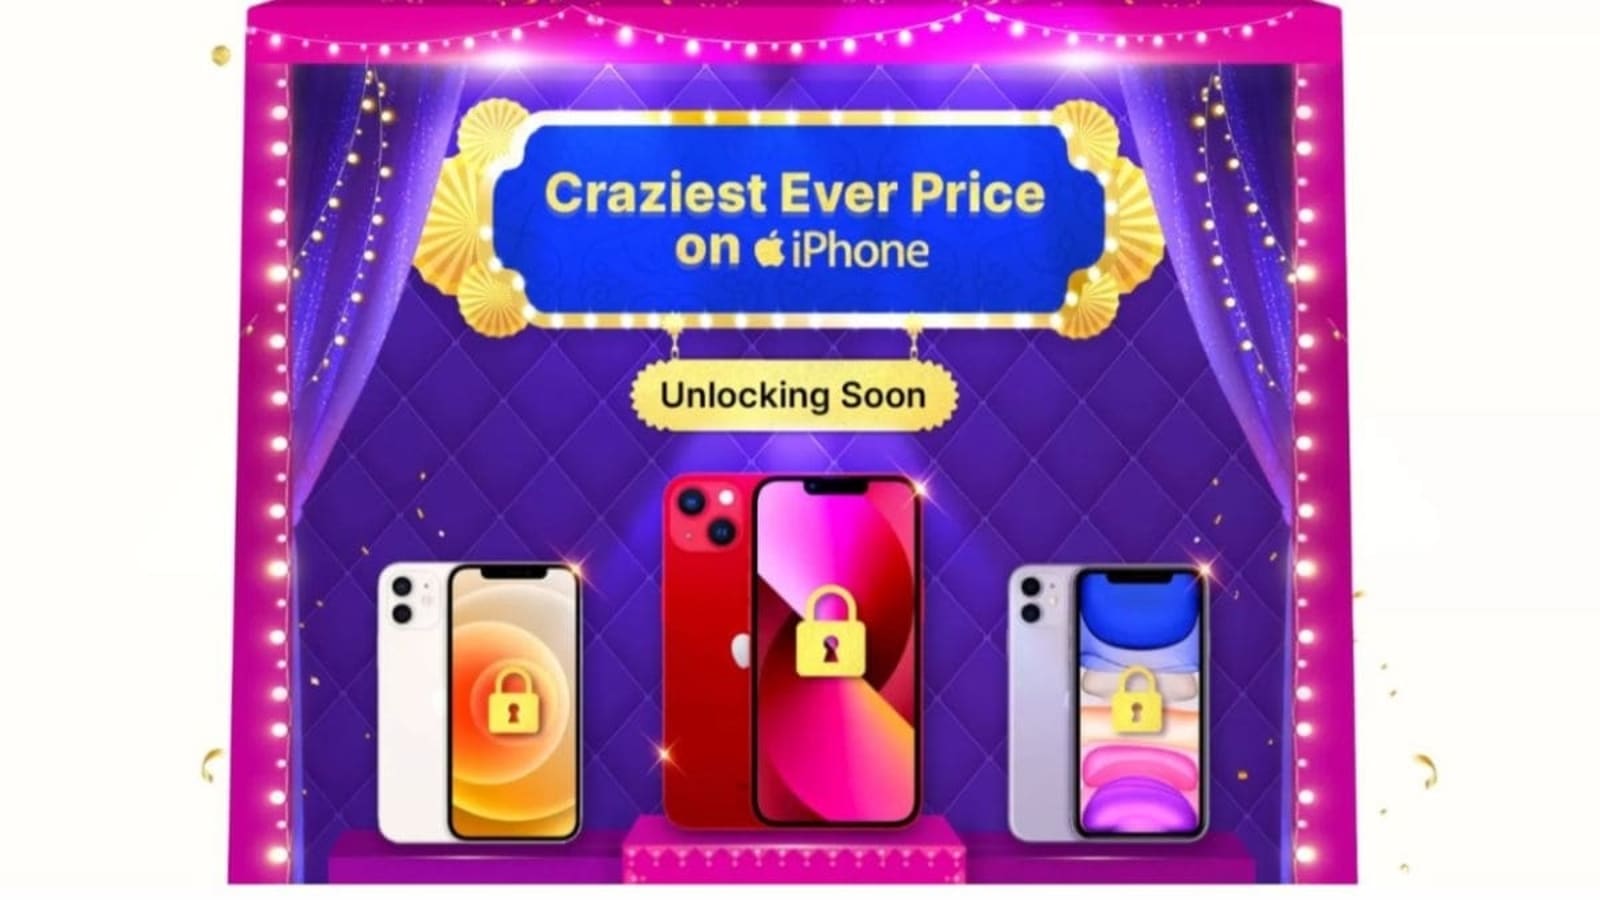 iphone-13-iphone-11-samsung-galaxy-s22-discounts-rolled-out-for-flipkart-big-billion-days